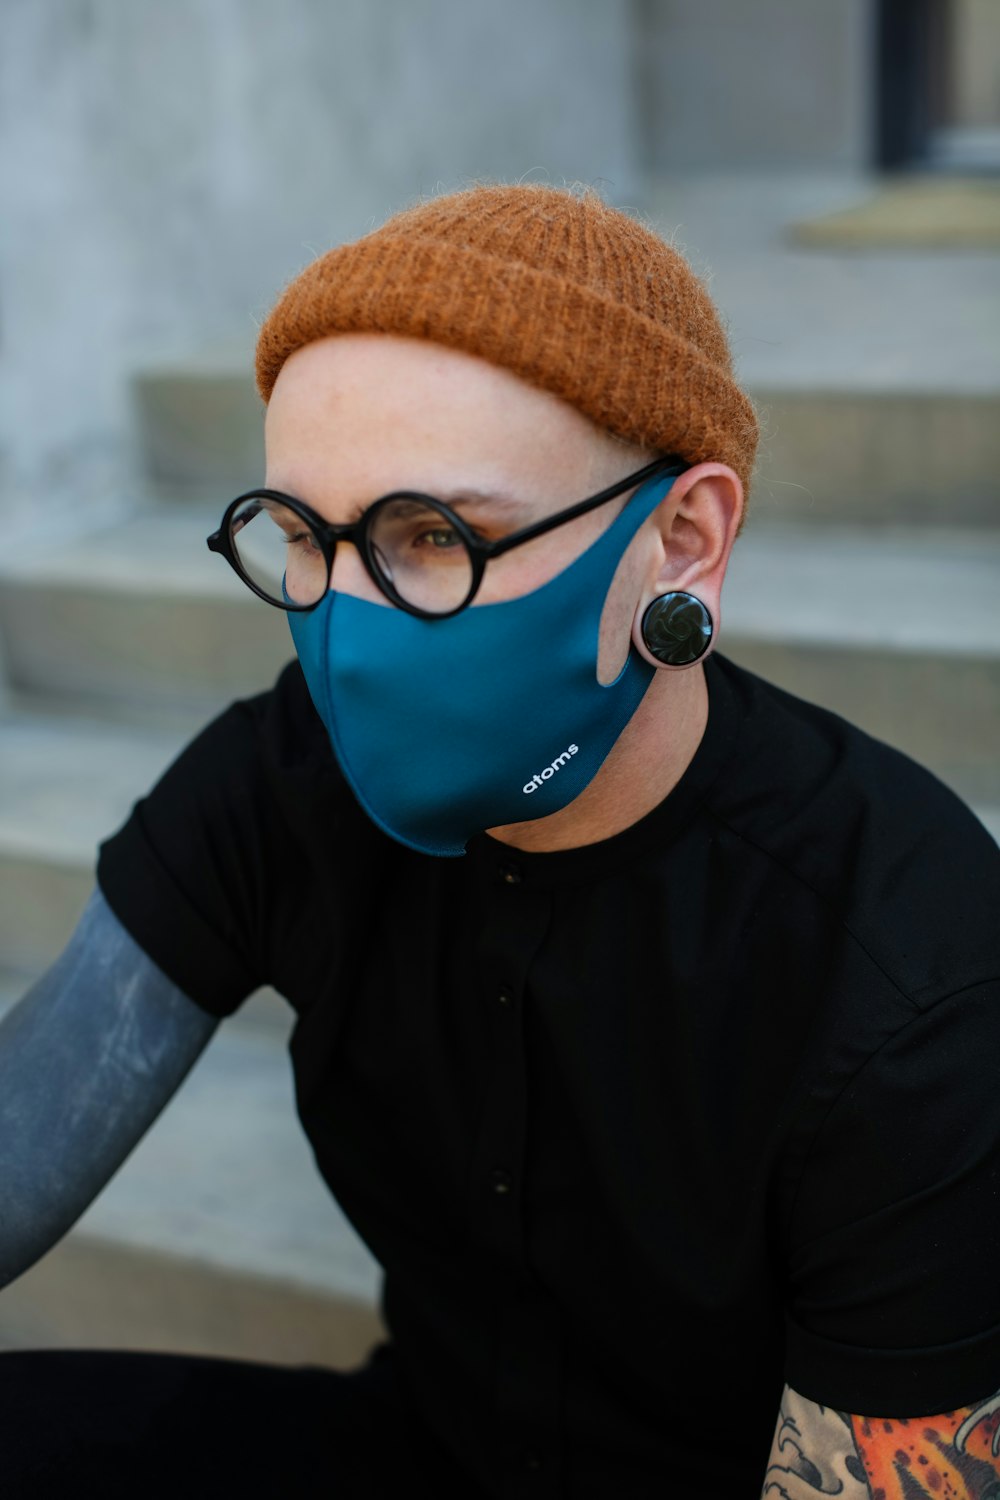 man in black button up shirt wearing brown knit cap and blue goggles